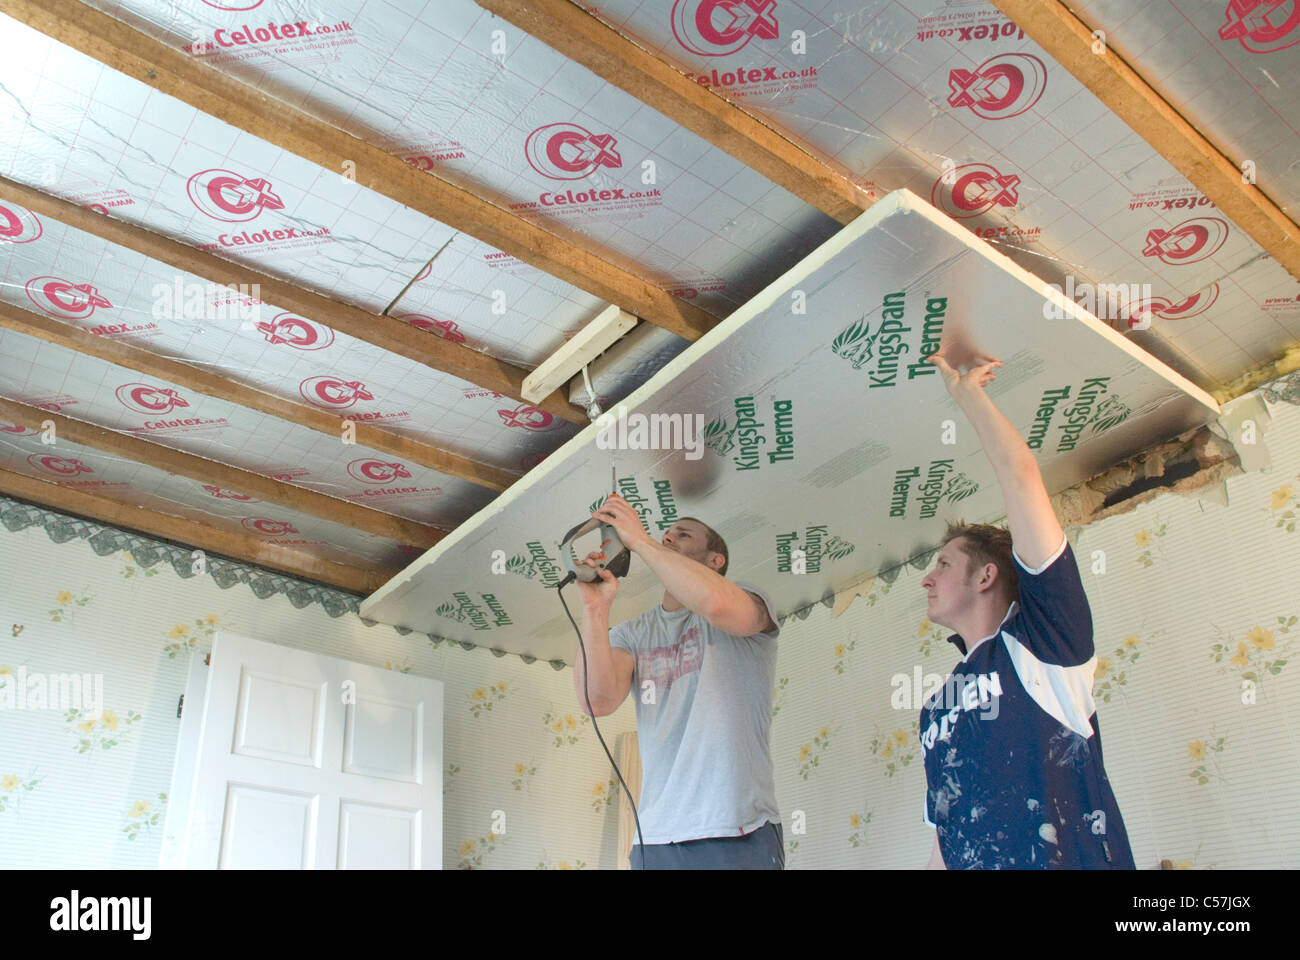 Builders installing high performance Kingspan and Celotex thermal insulation boards to the walls and ceiling of an older home Stock Photo